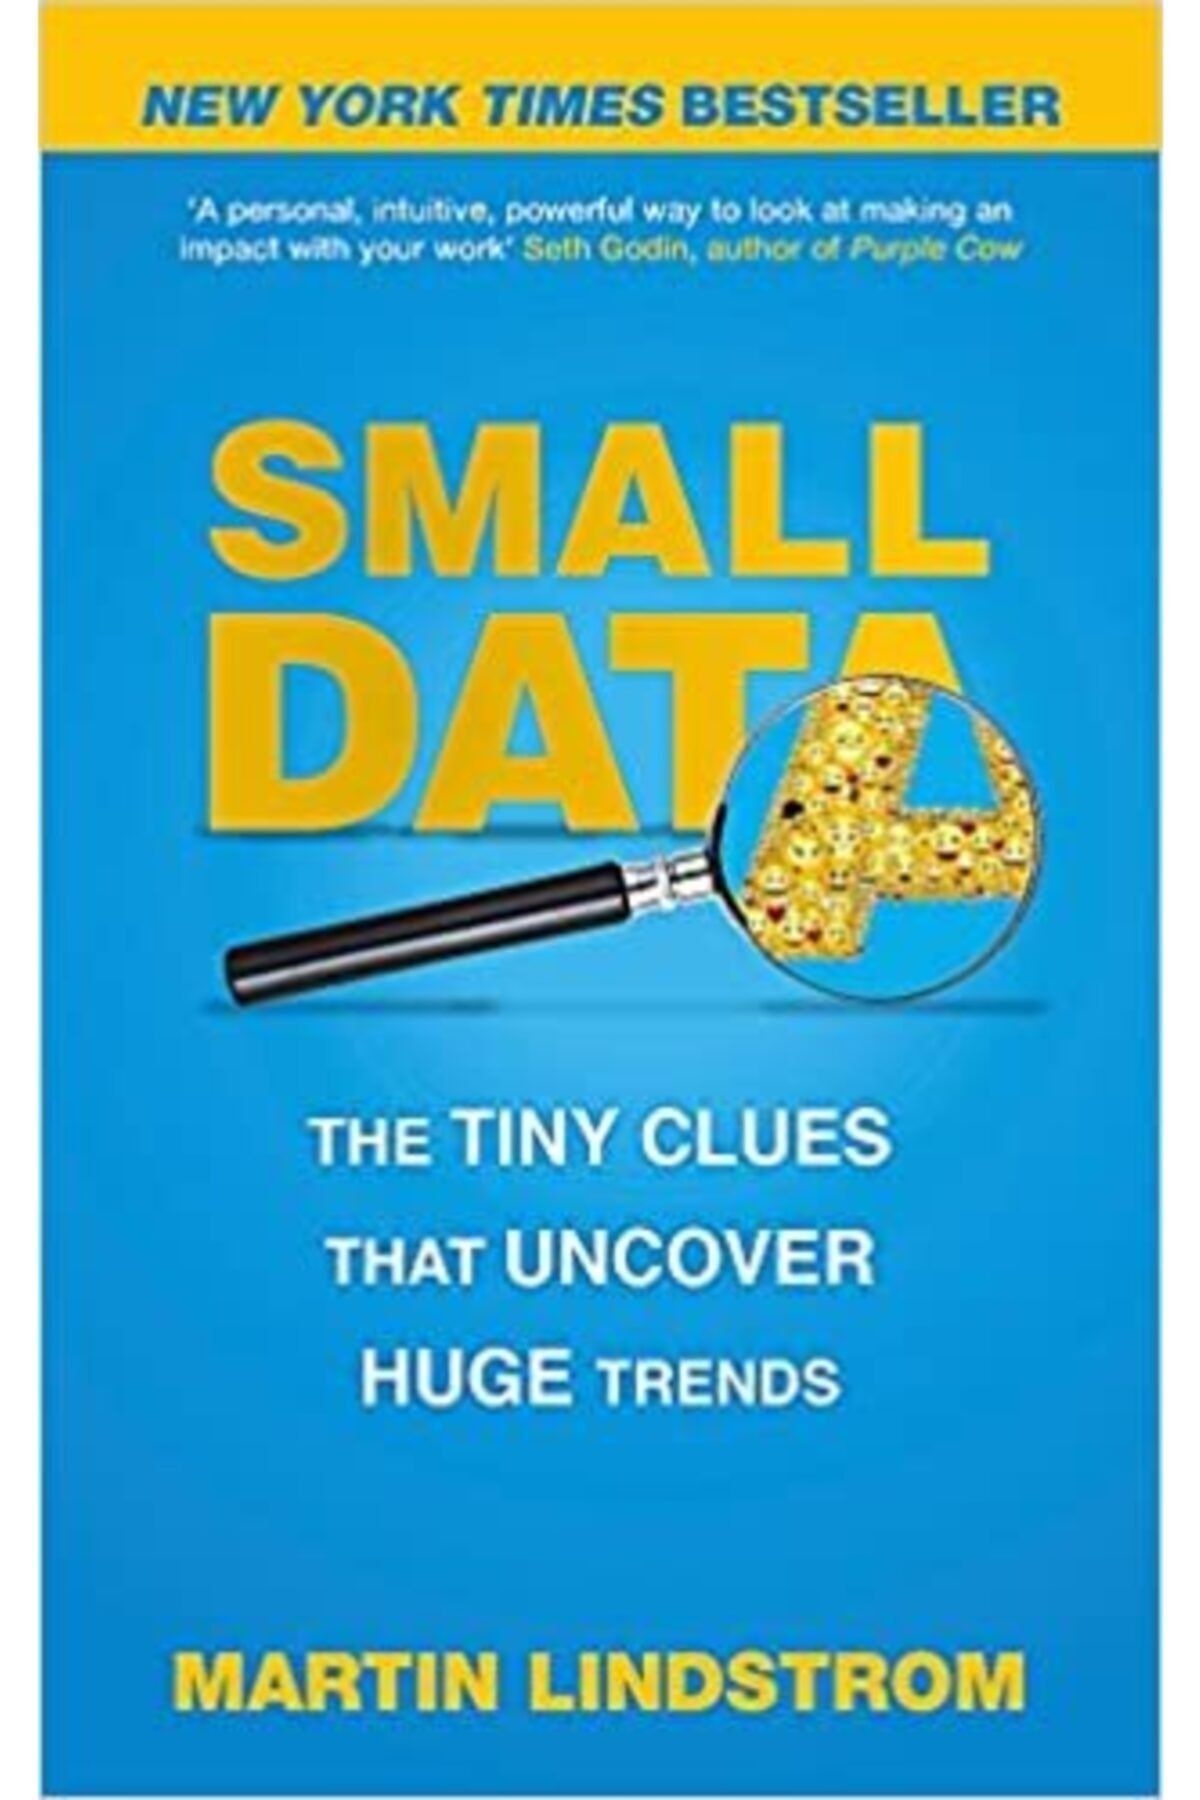 Elips Kitap Small Data: The Tiny Clues That Uncover Huge Trends